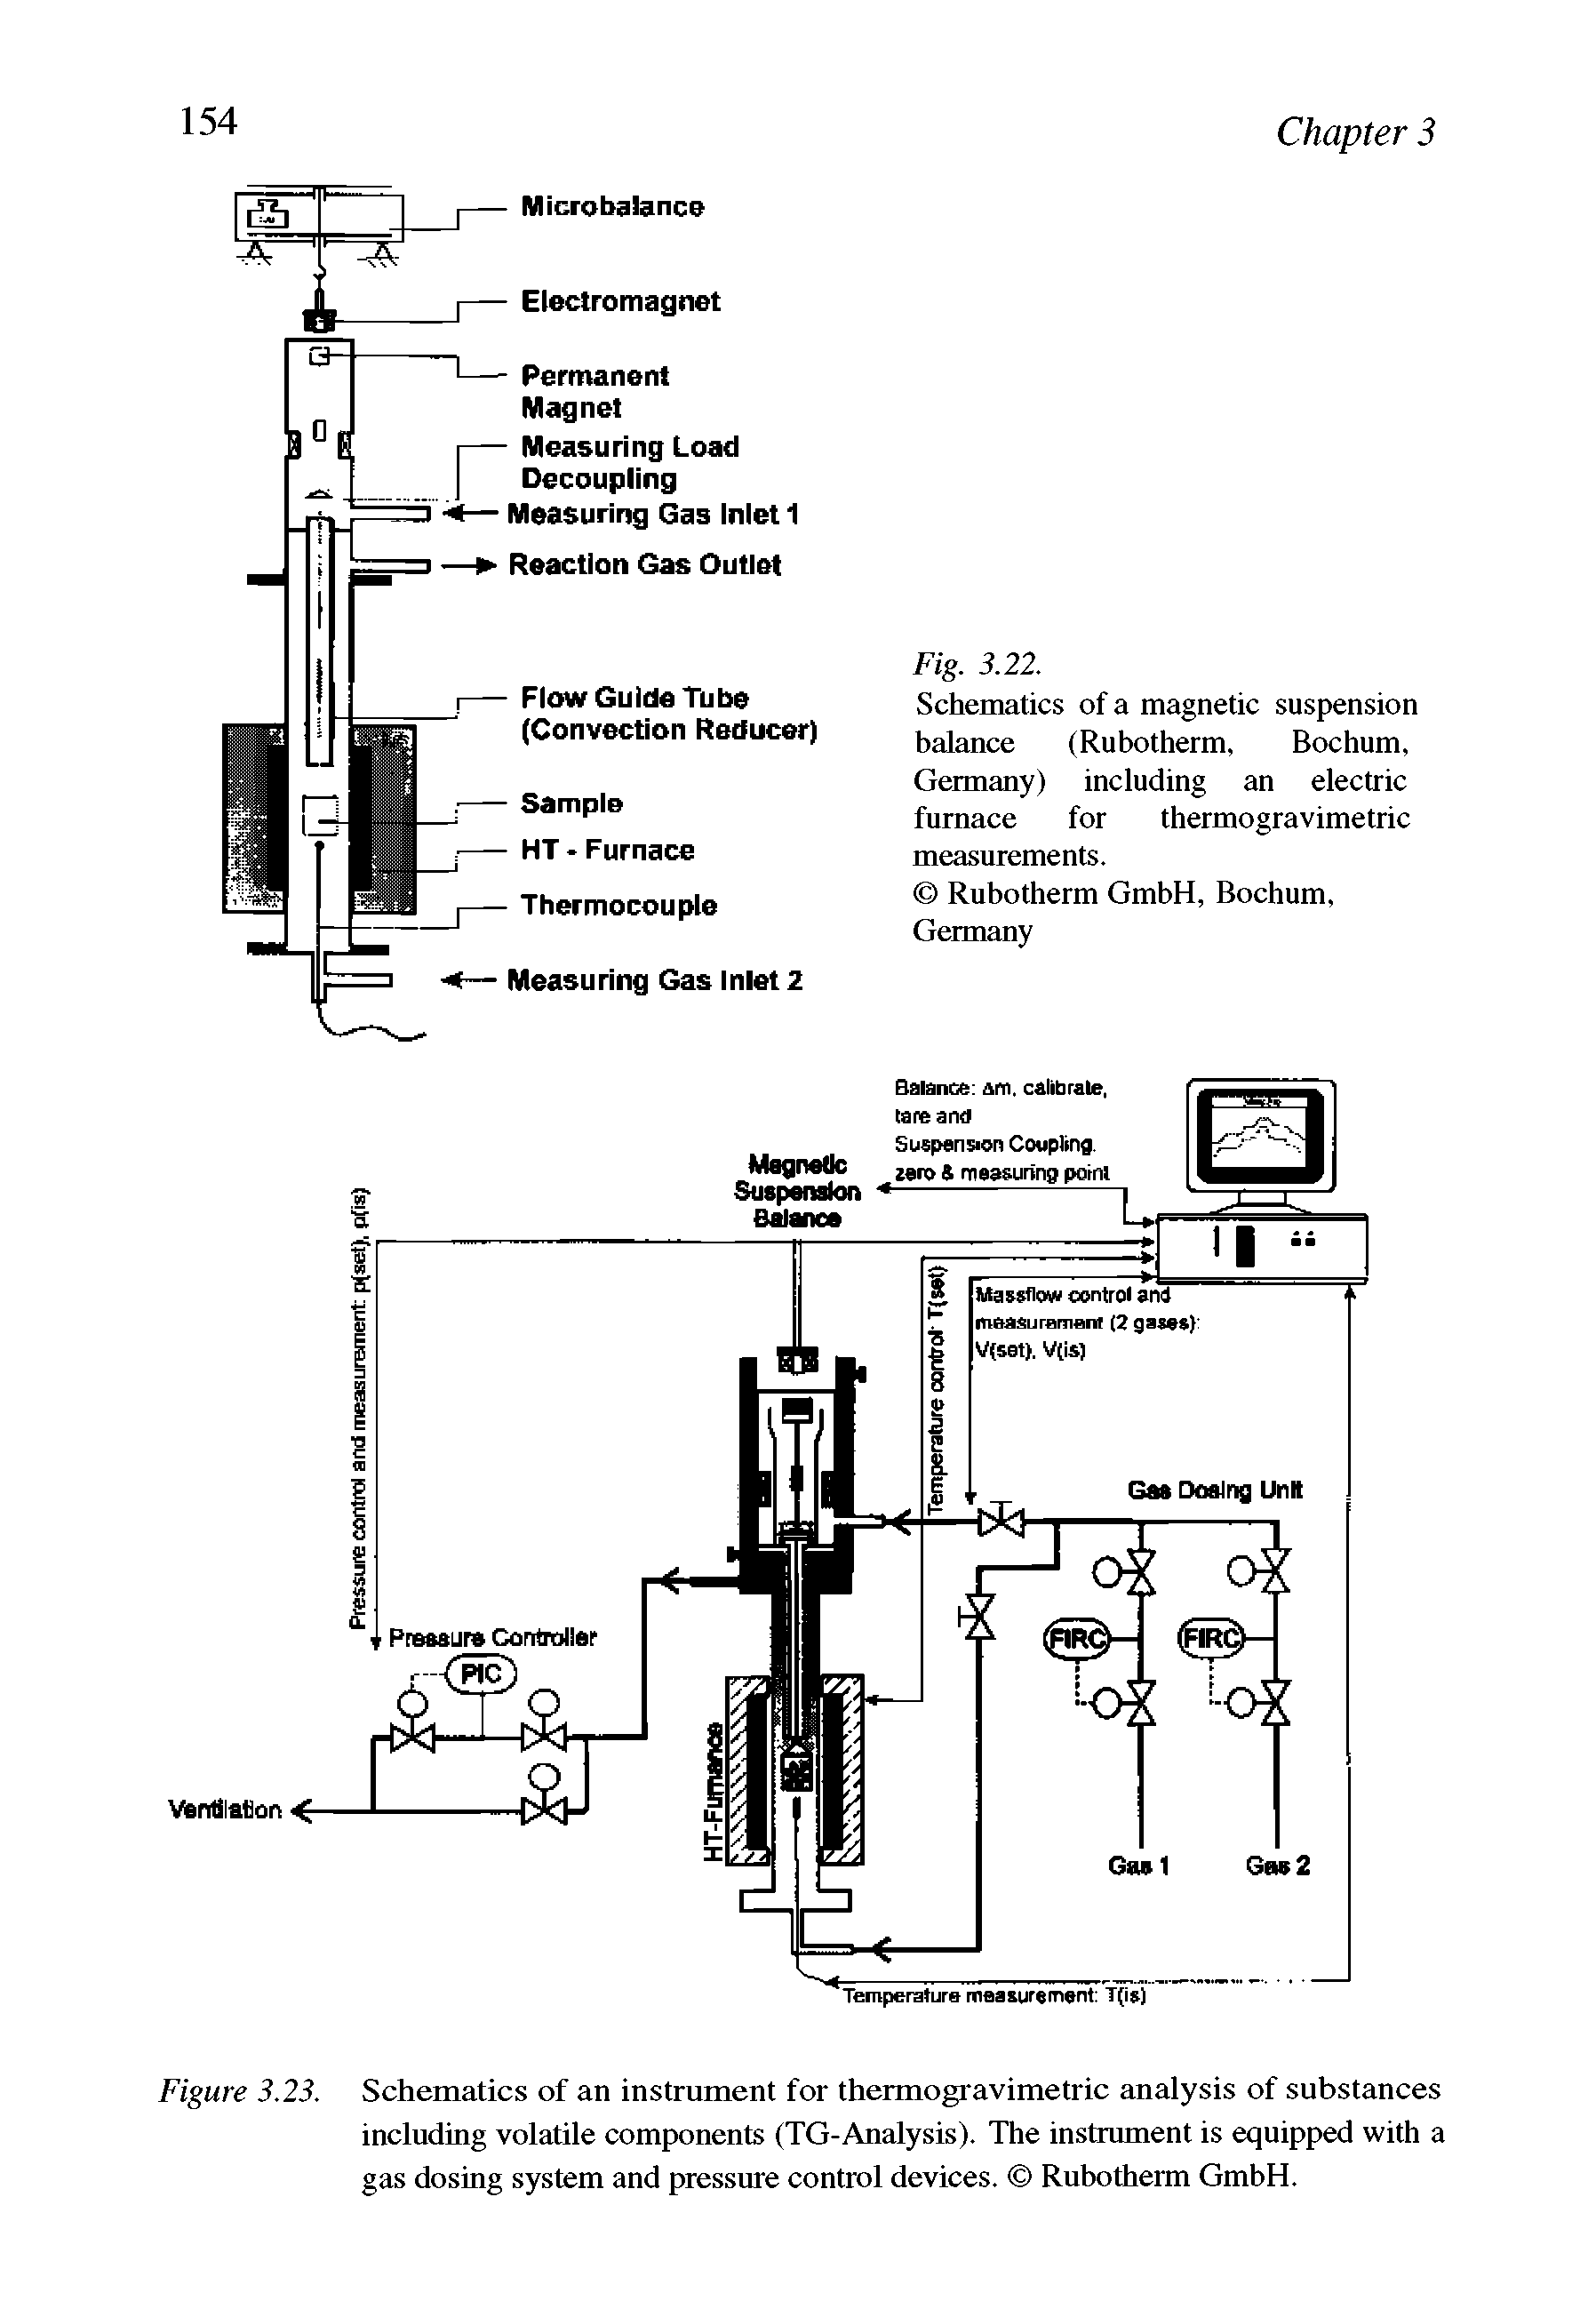 Figure 3.23. Schematics of an instrument for thermogravimetric analysis of substances including volatile components (TG-Analysis). The instrument is equipped with a gas dosing system and pressure control devices. Rubotherm GmbH.